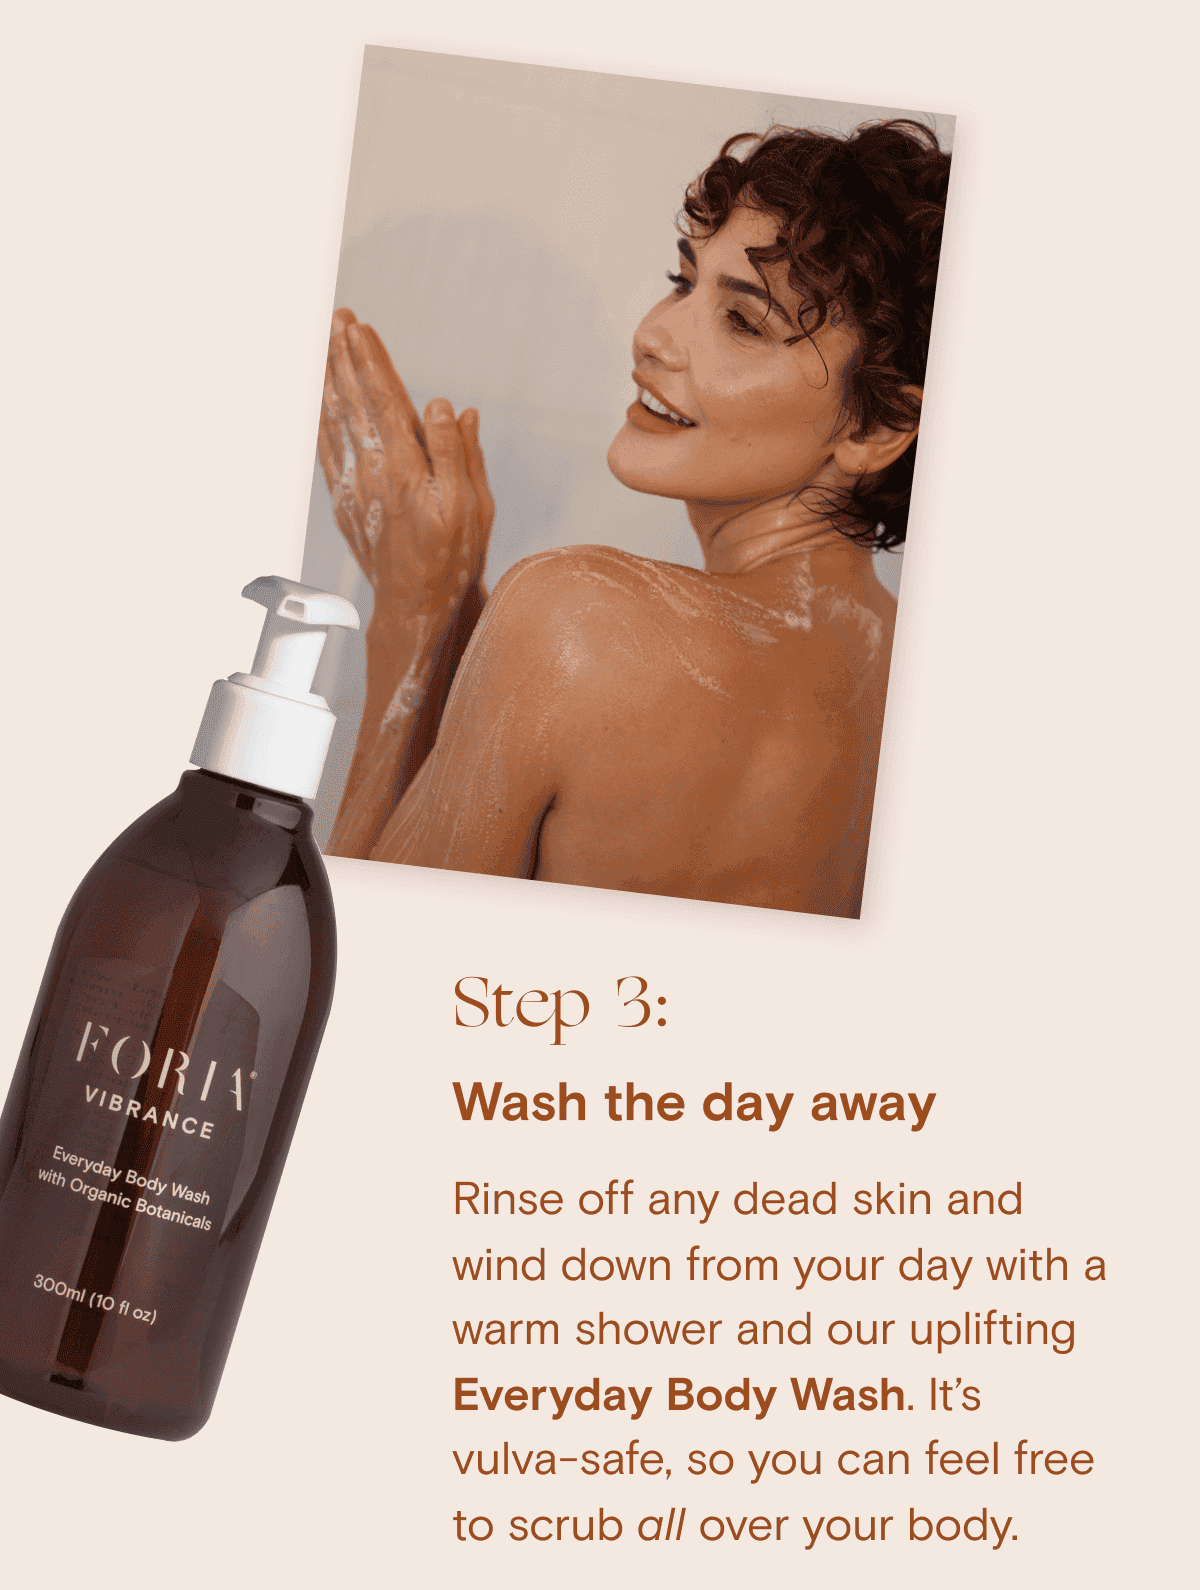 Step 3: Wash the day away